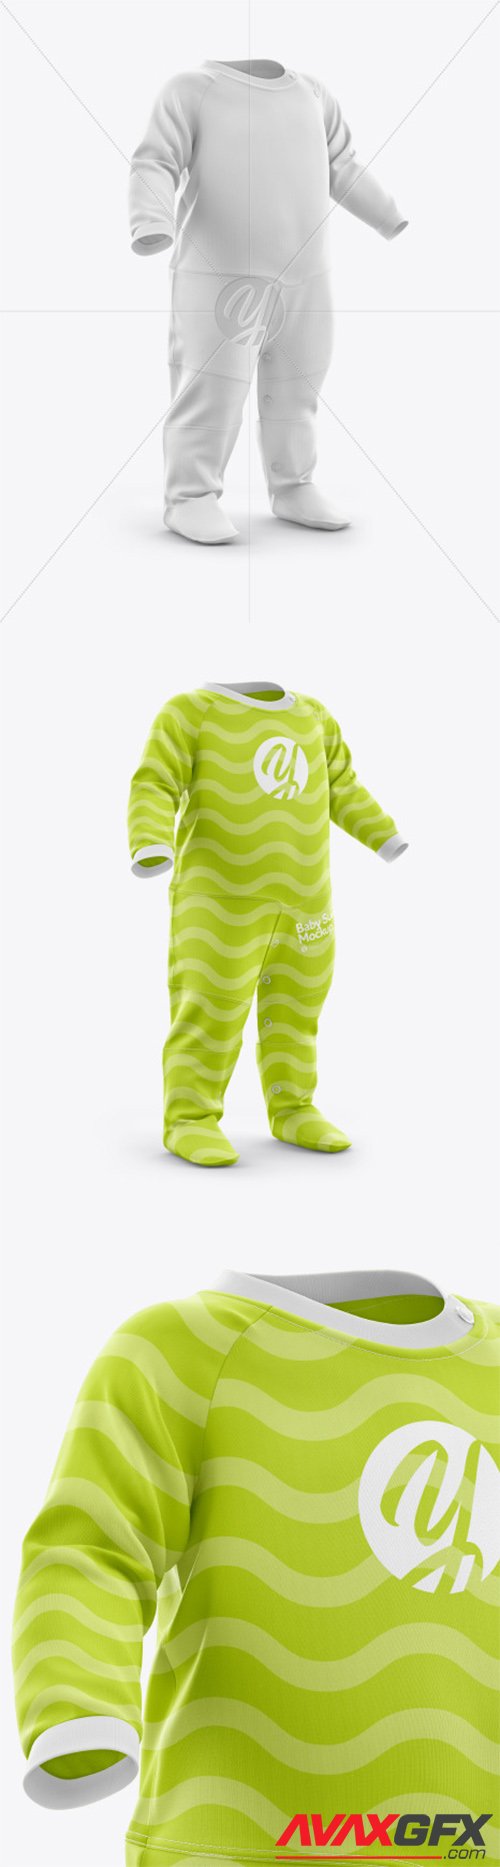 Baby Suit Mockup - Half Side View 44256